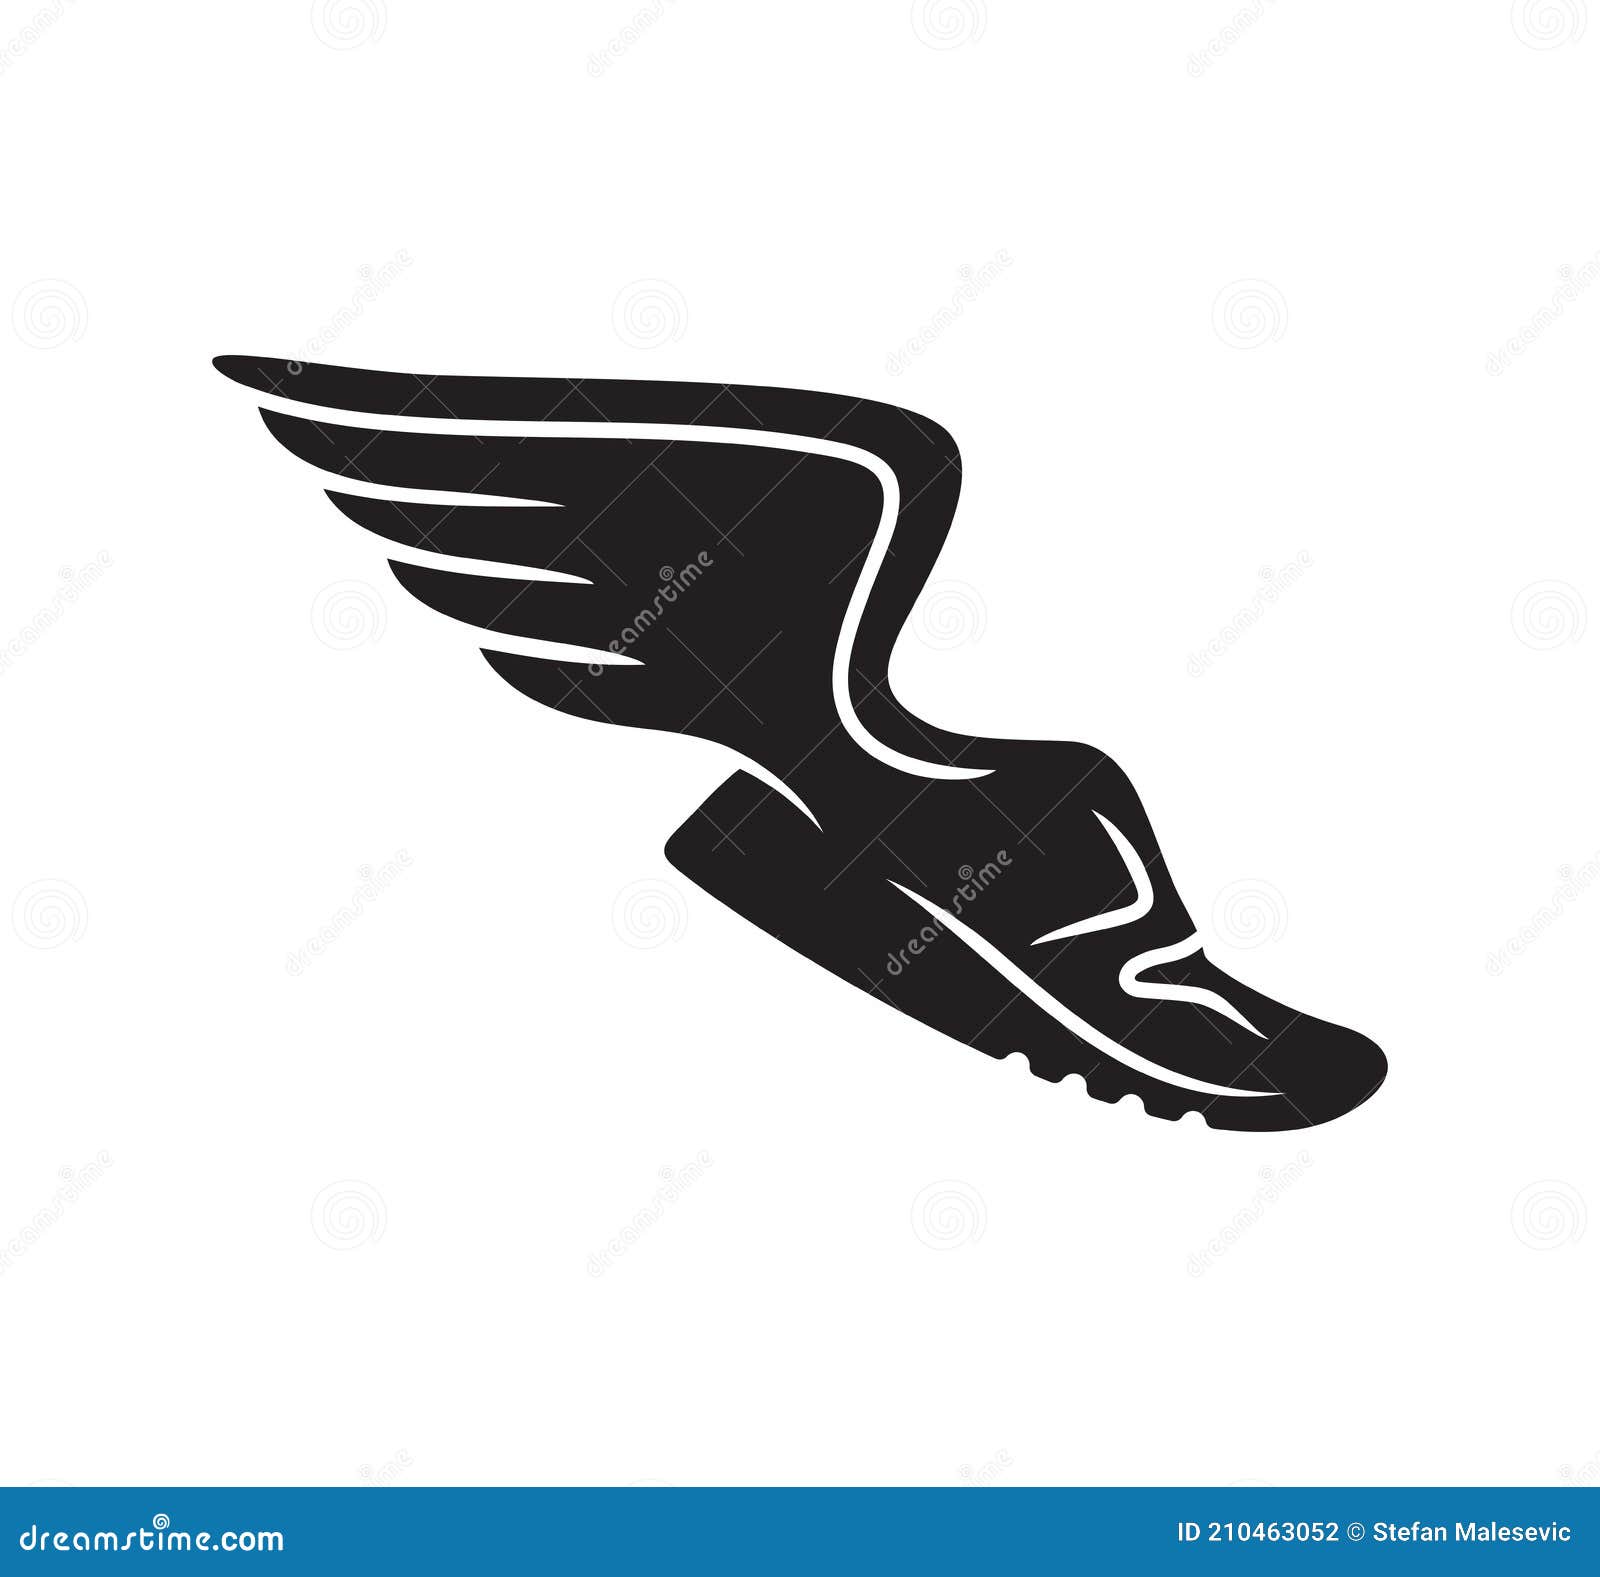 Sneaker shoe with wings stock illustration. Illustration of clothing ...